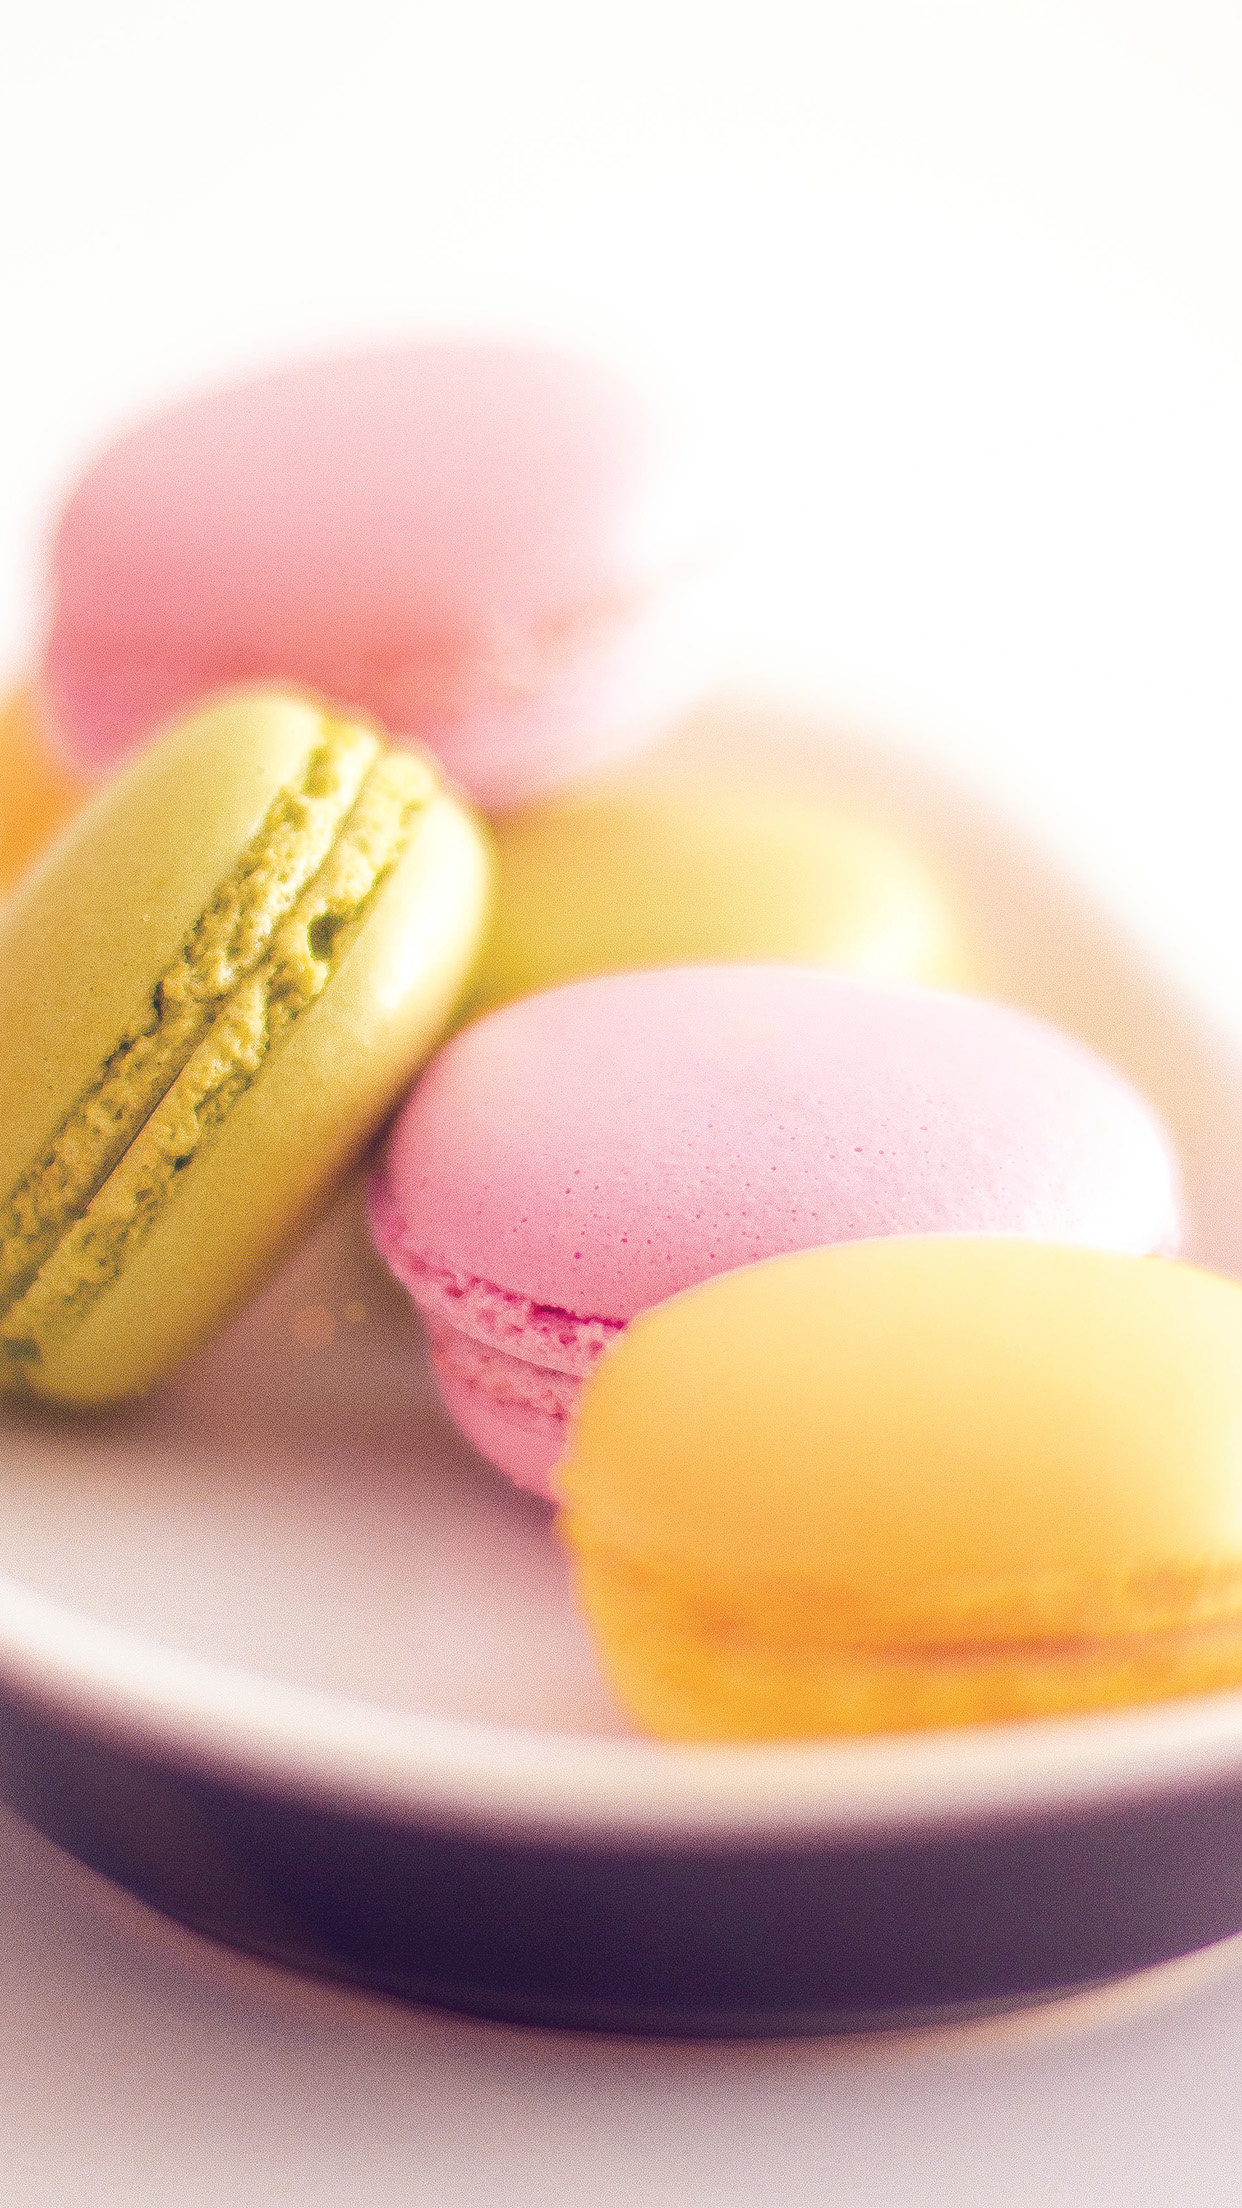 Macaron: Adorned with a variety of fillings including buttercream, chocolate ganache, marzipan, jam. 1250x2210 HD Wallpaper.